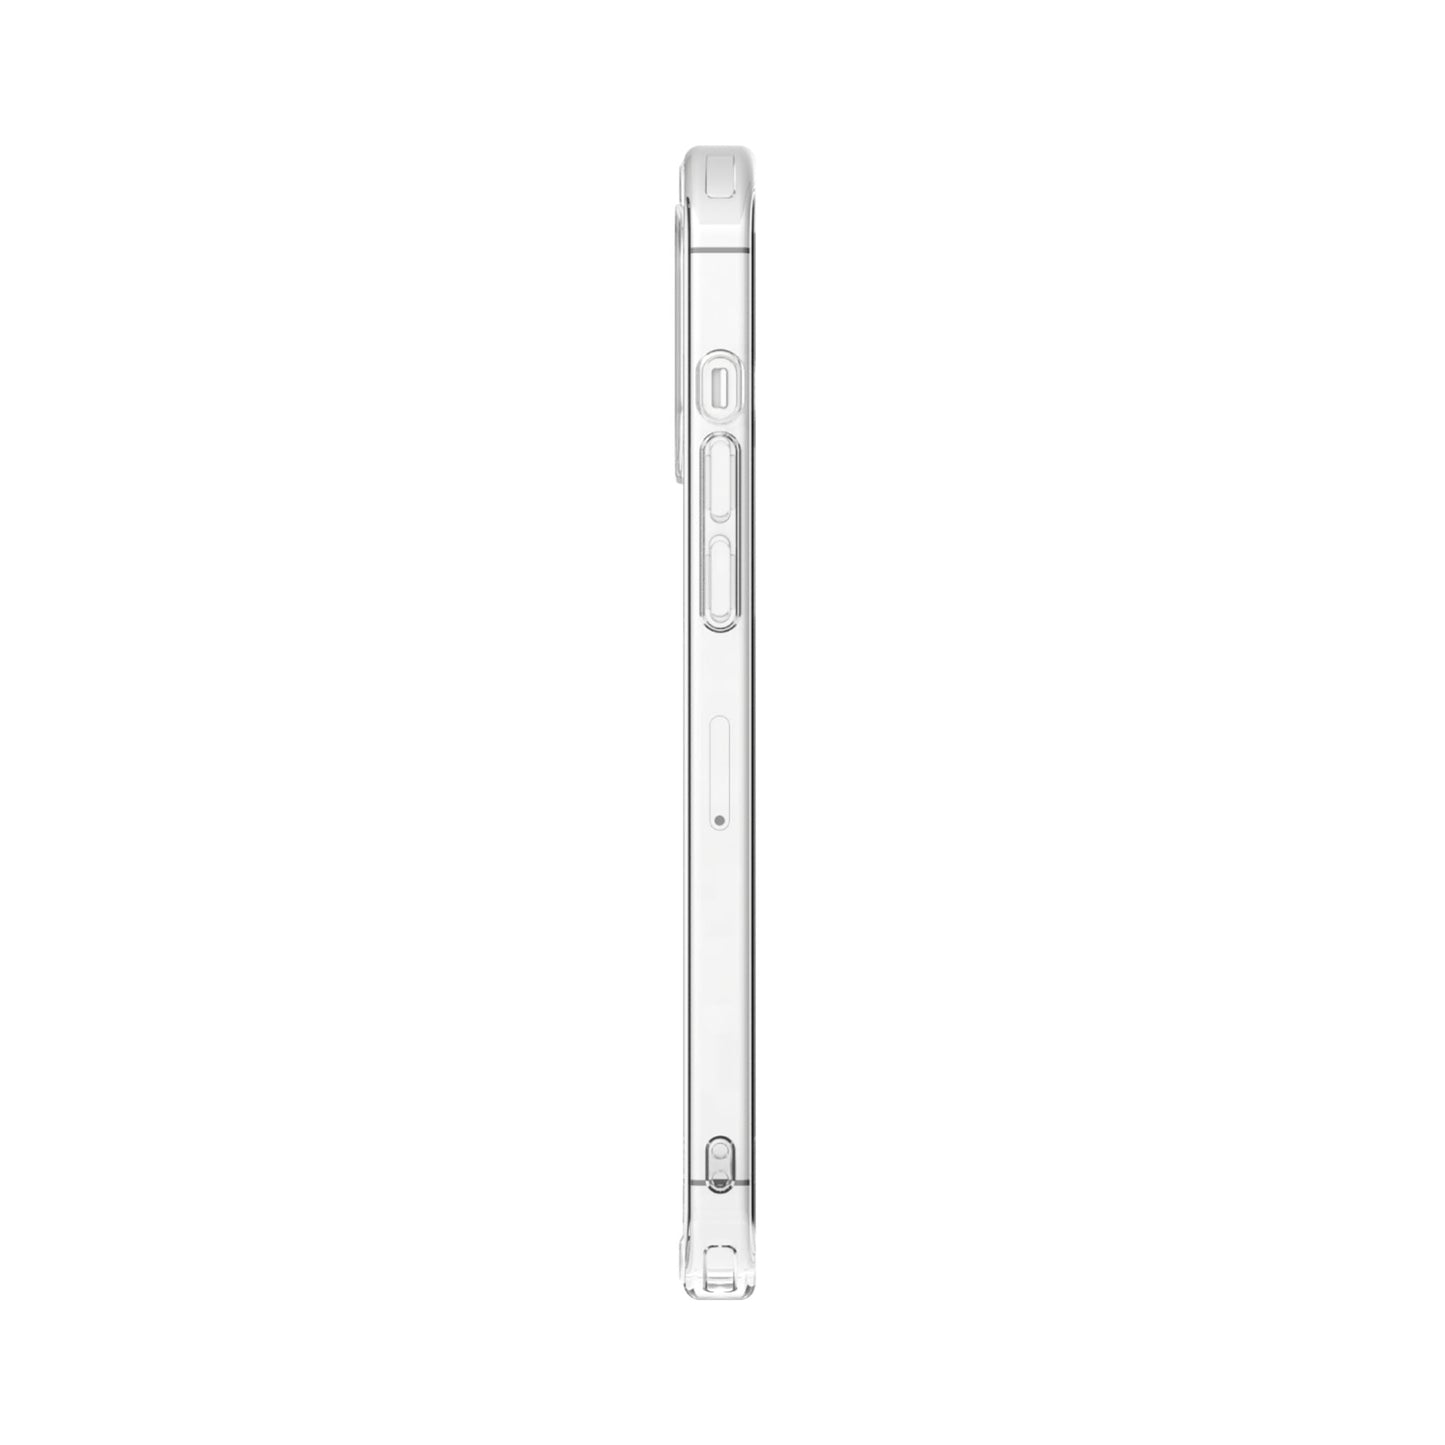 JUST MOBILE Tenc Air for iPhone 12 Pro Max - Crystal Clear